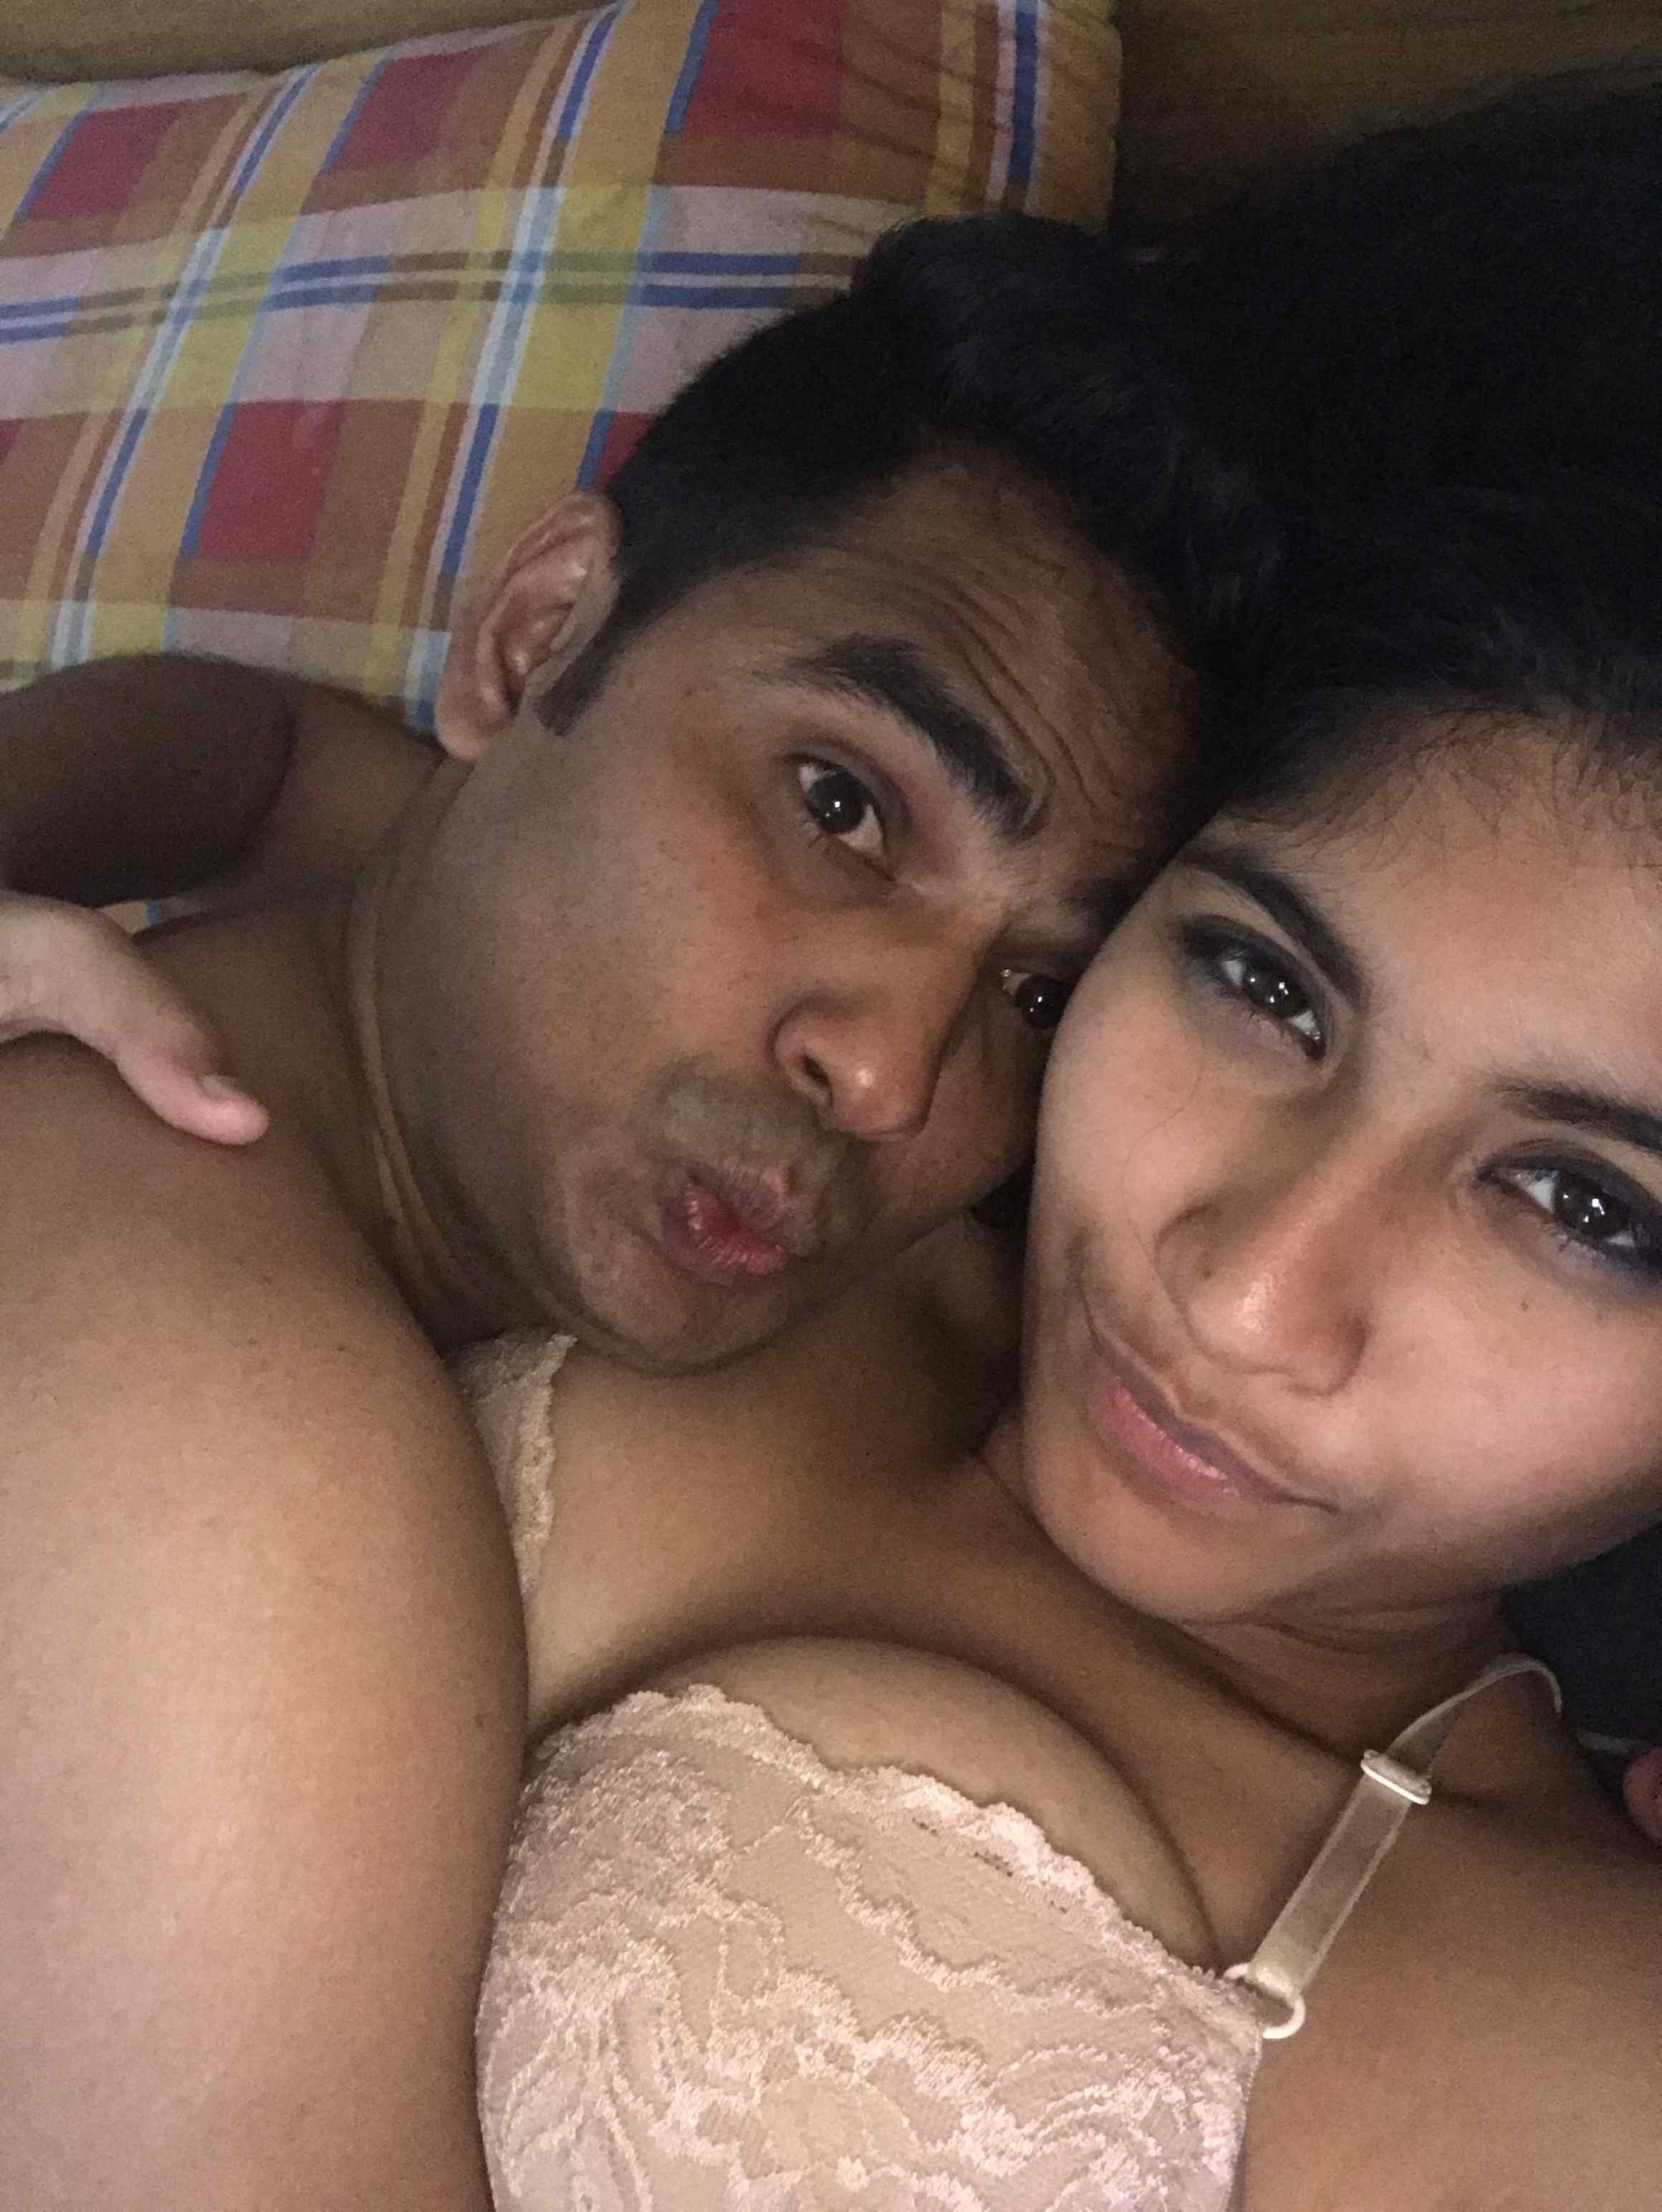 Indian Couple In Bedroom Night Show